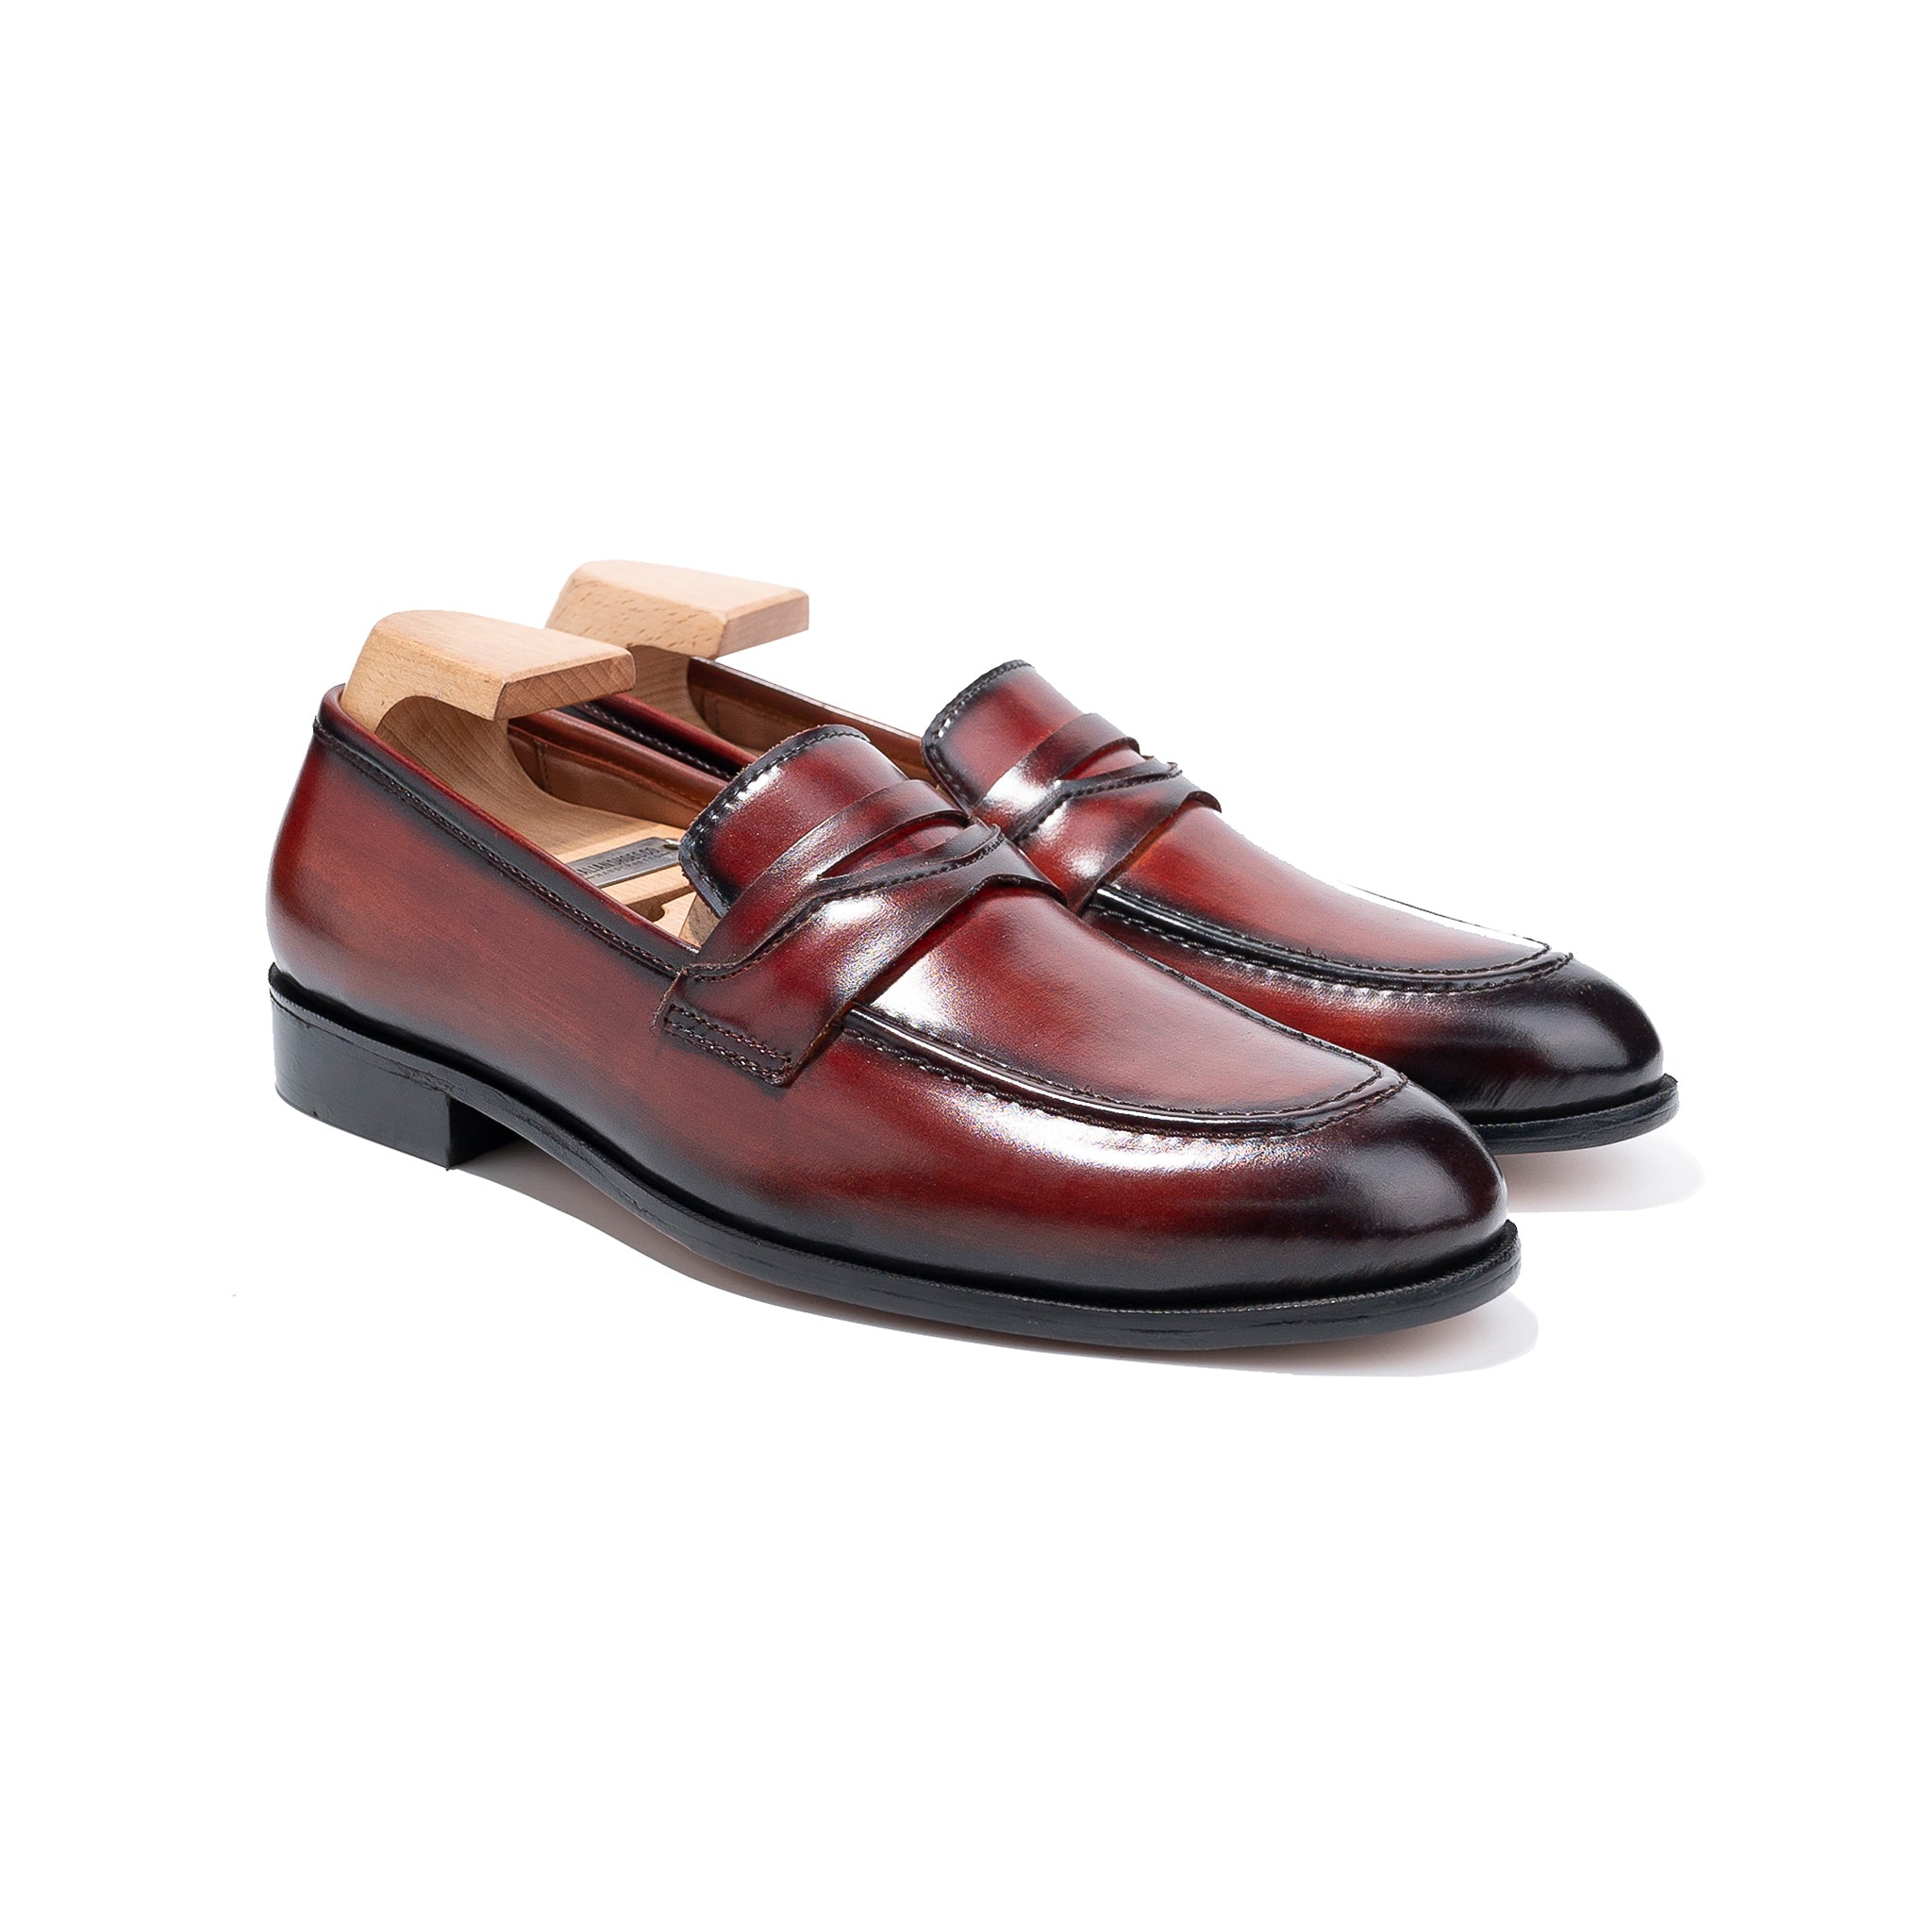 Handmade Formal Leather Shoes